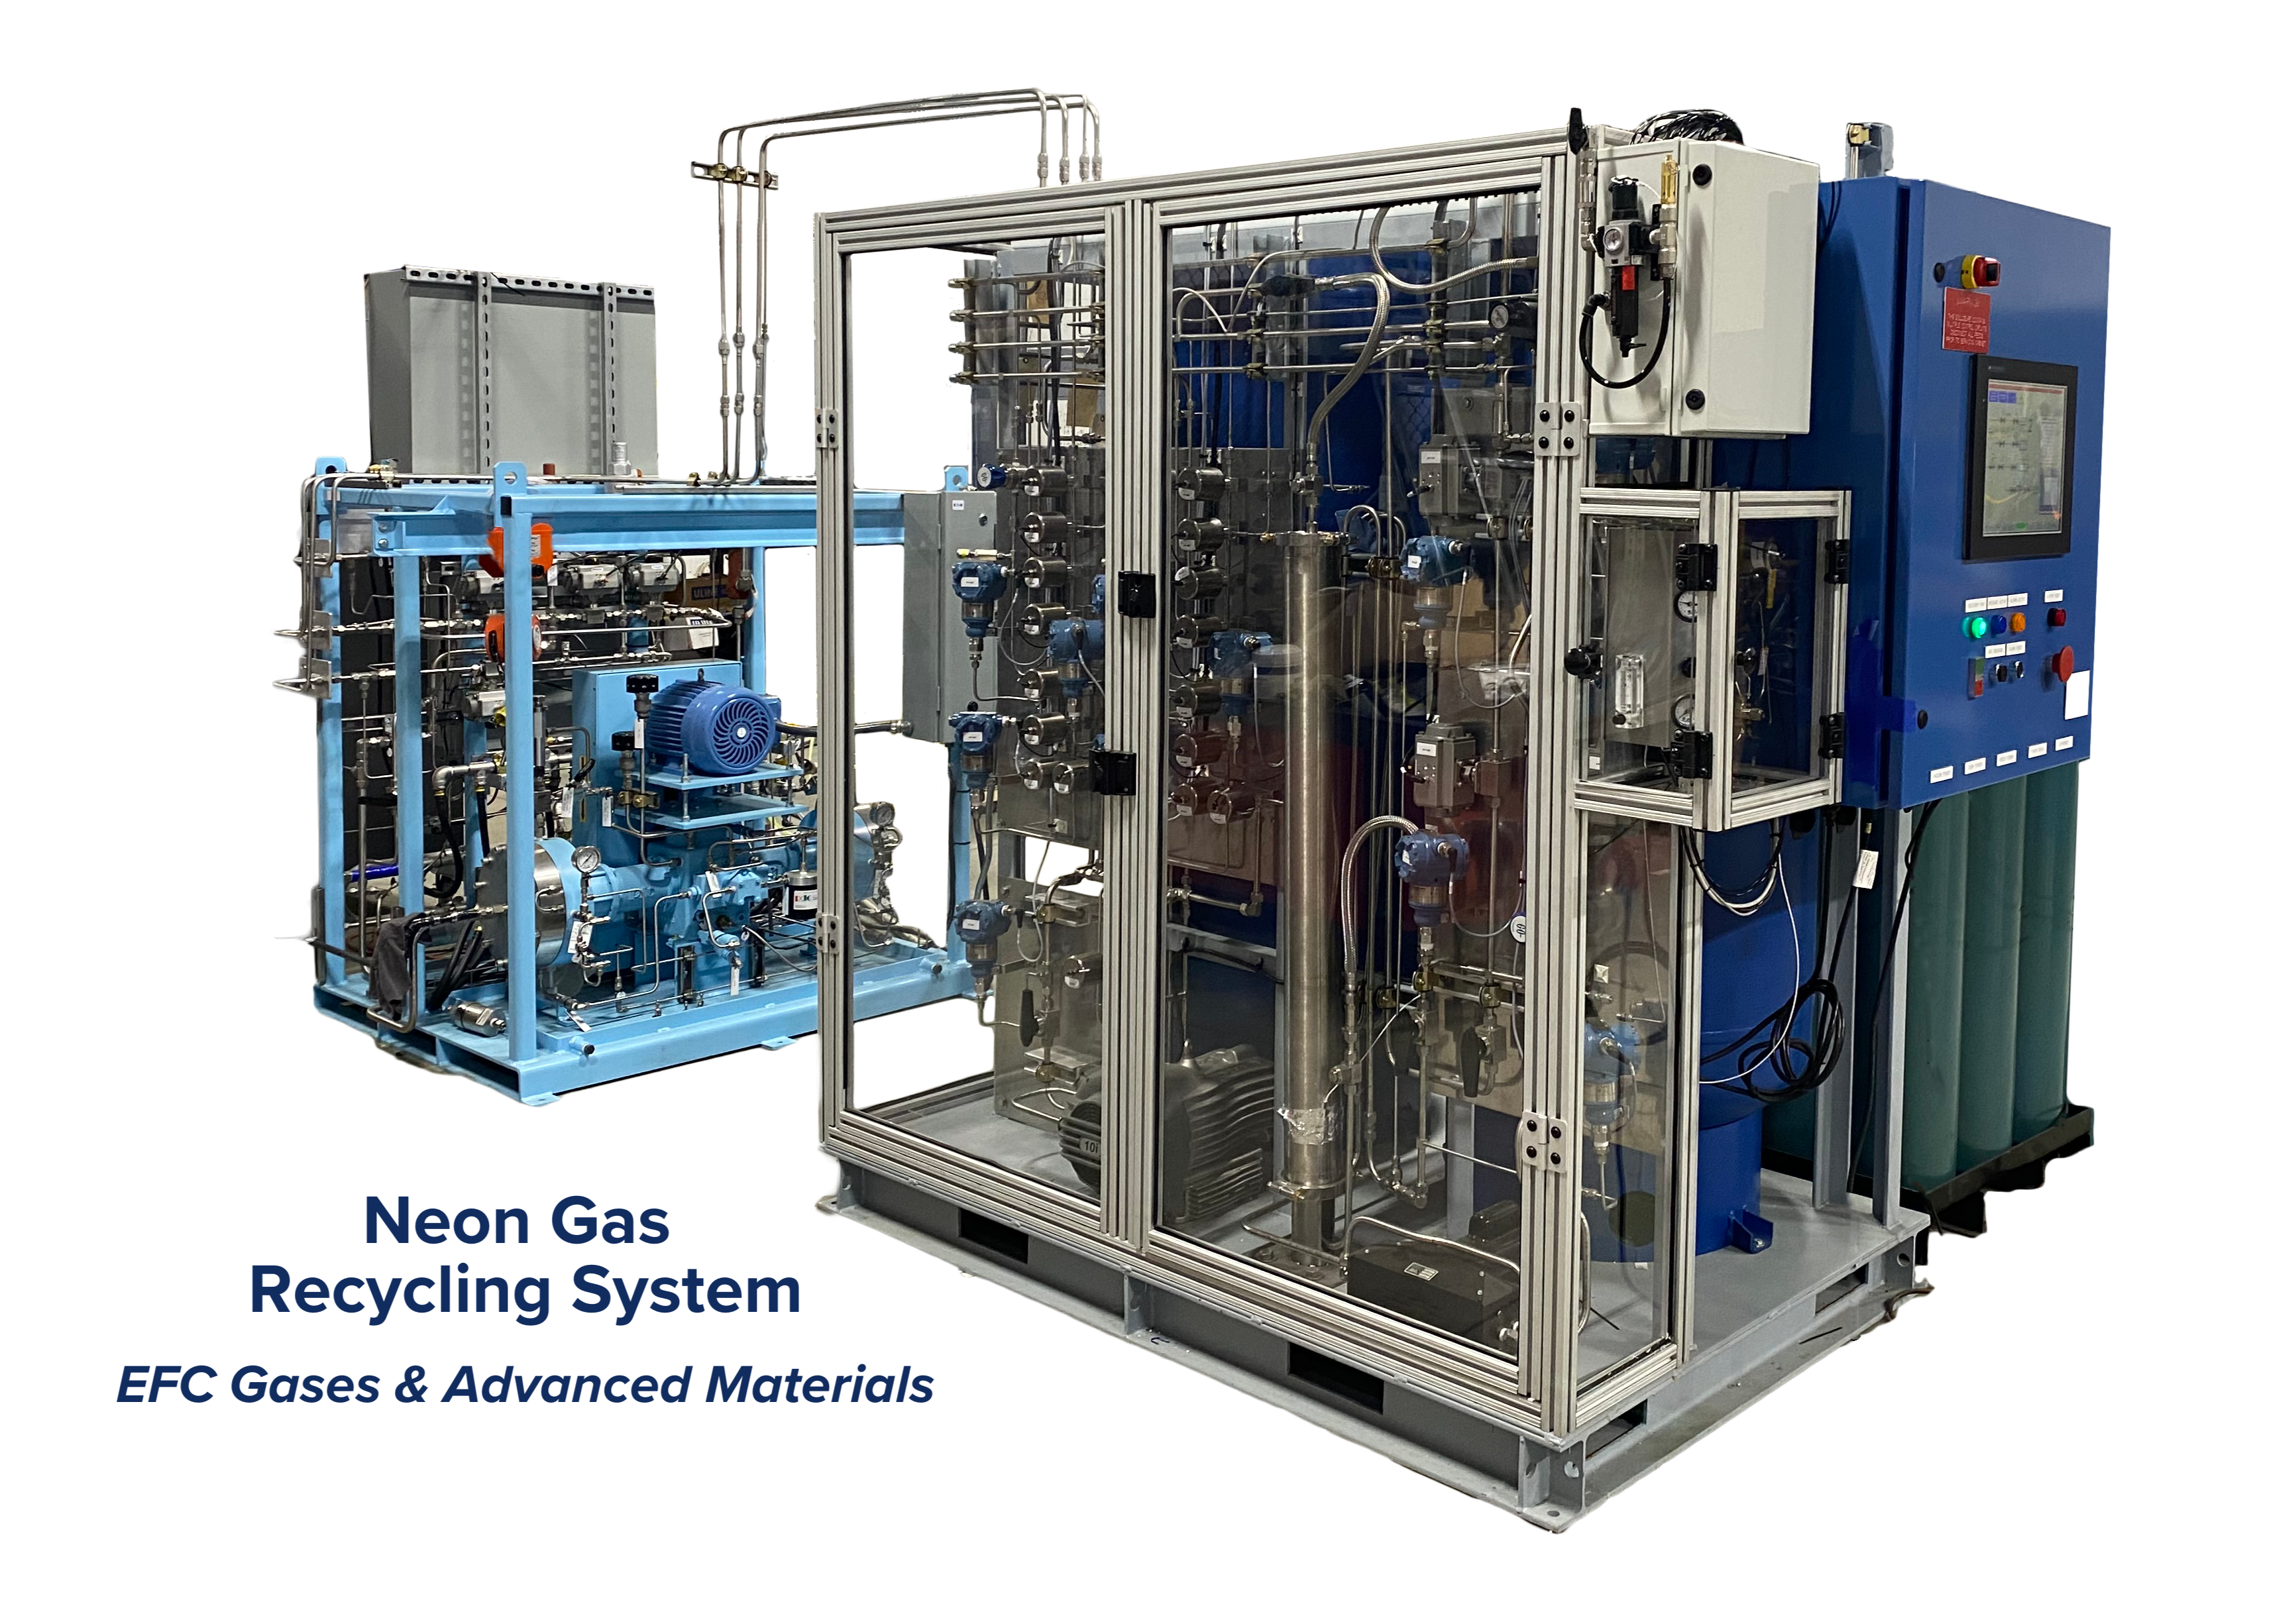 EFC's new neon gas recycling system for excimer lasers